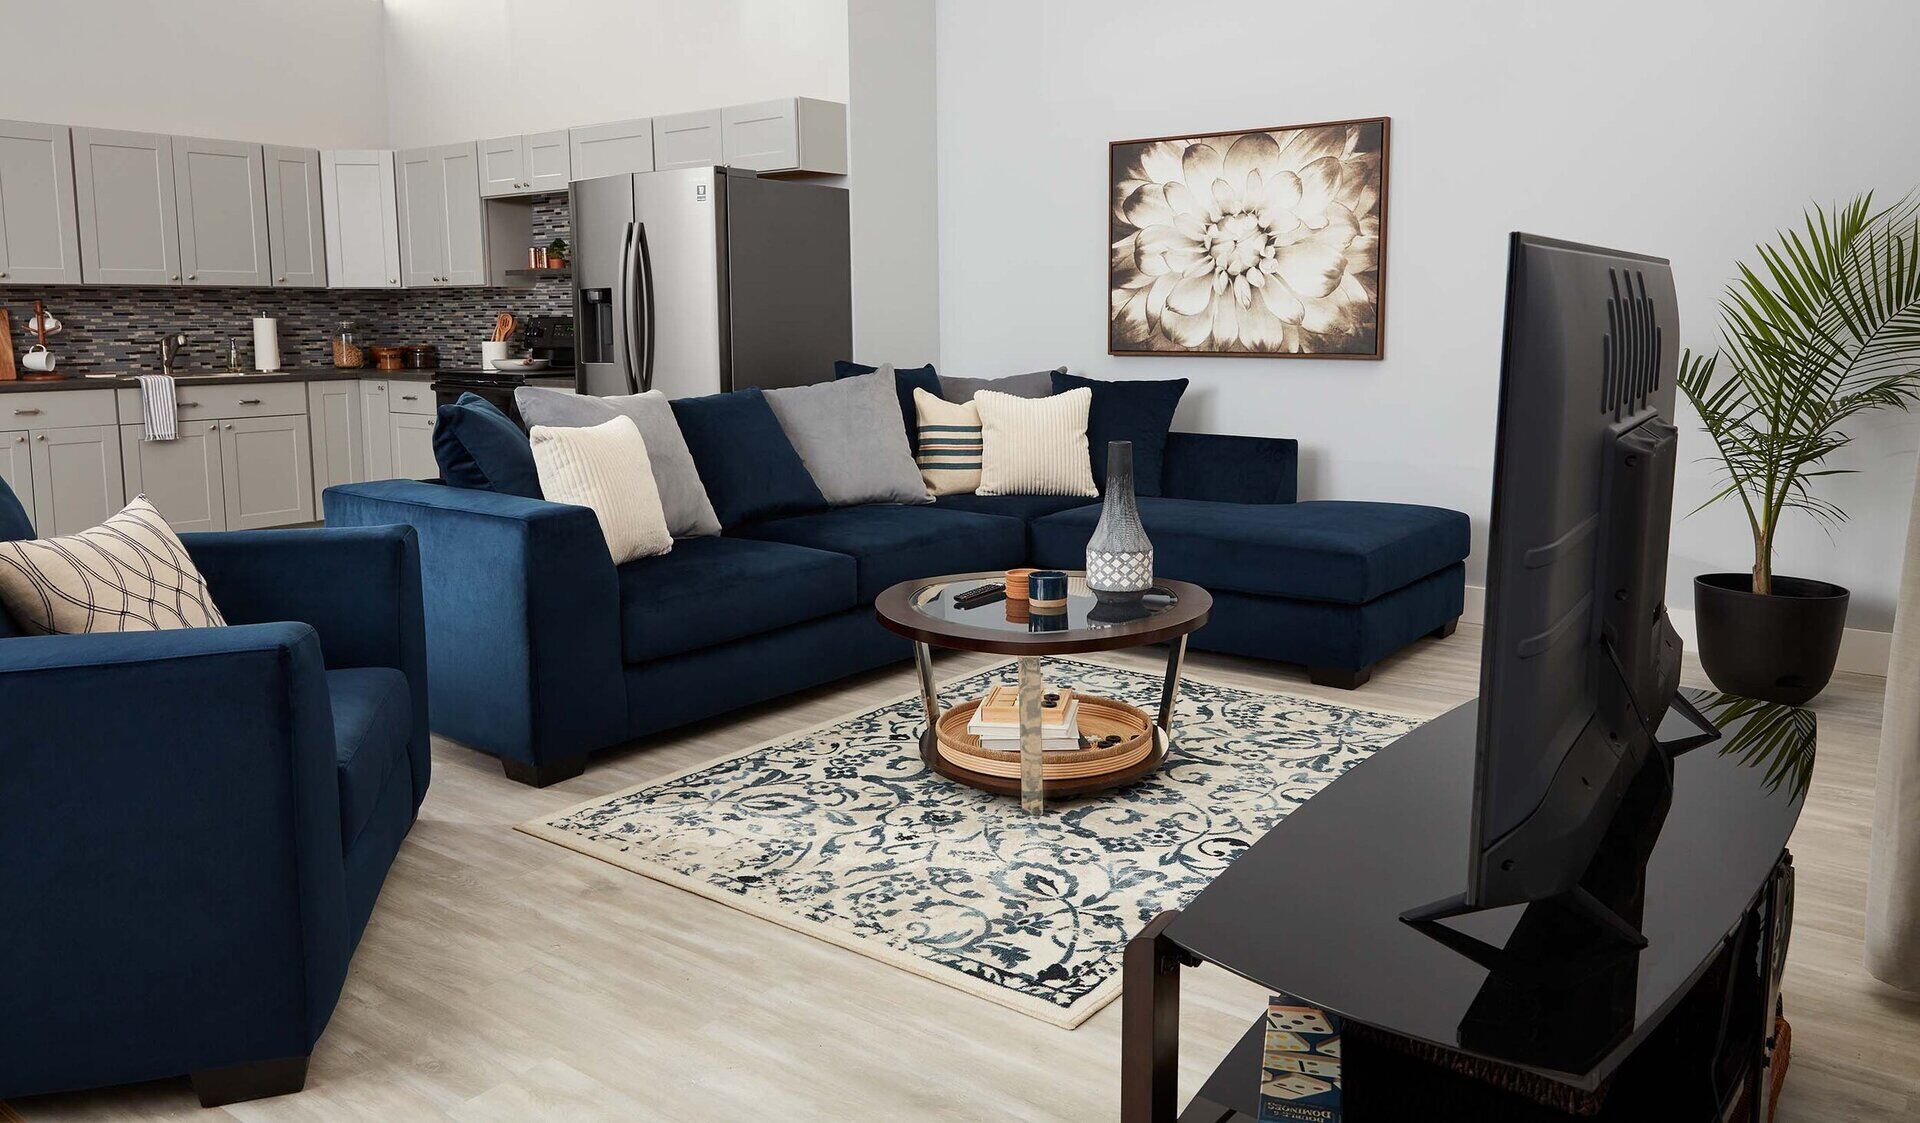 Where To Place A Rug In A Living Room